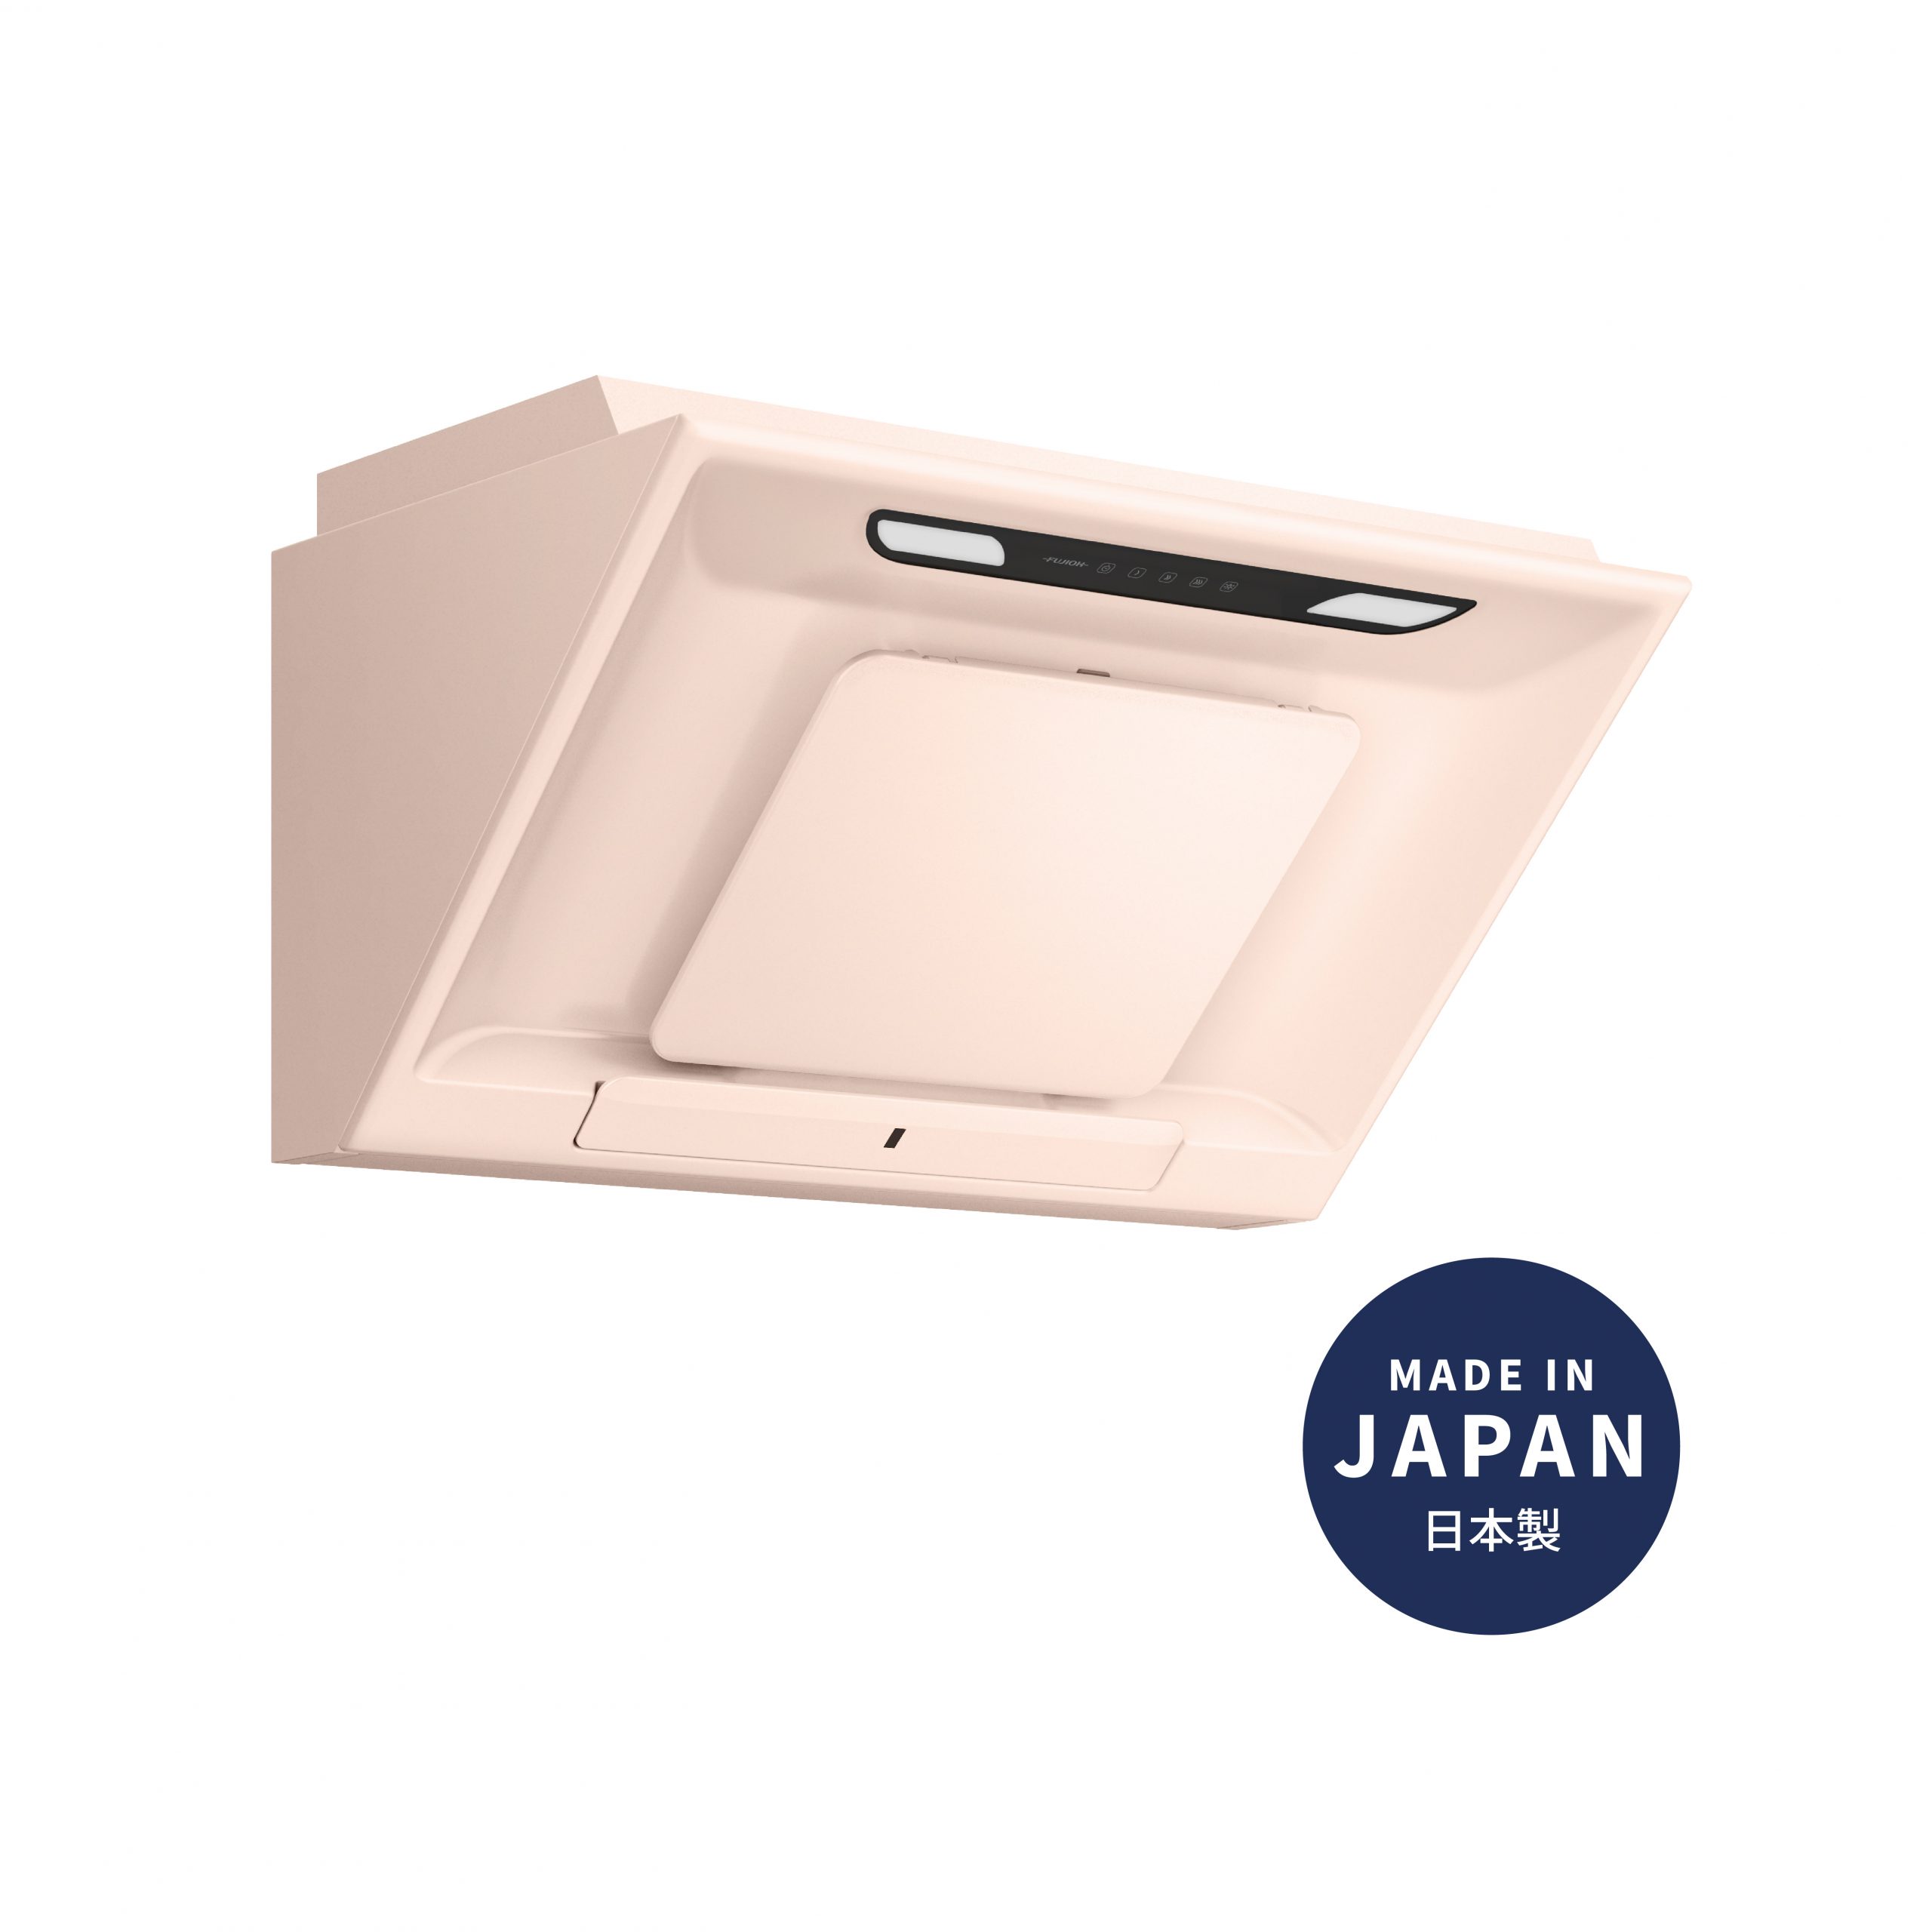 Made in Japan Inclined Design Cooker Hood